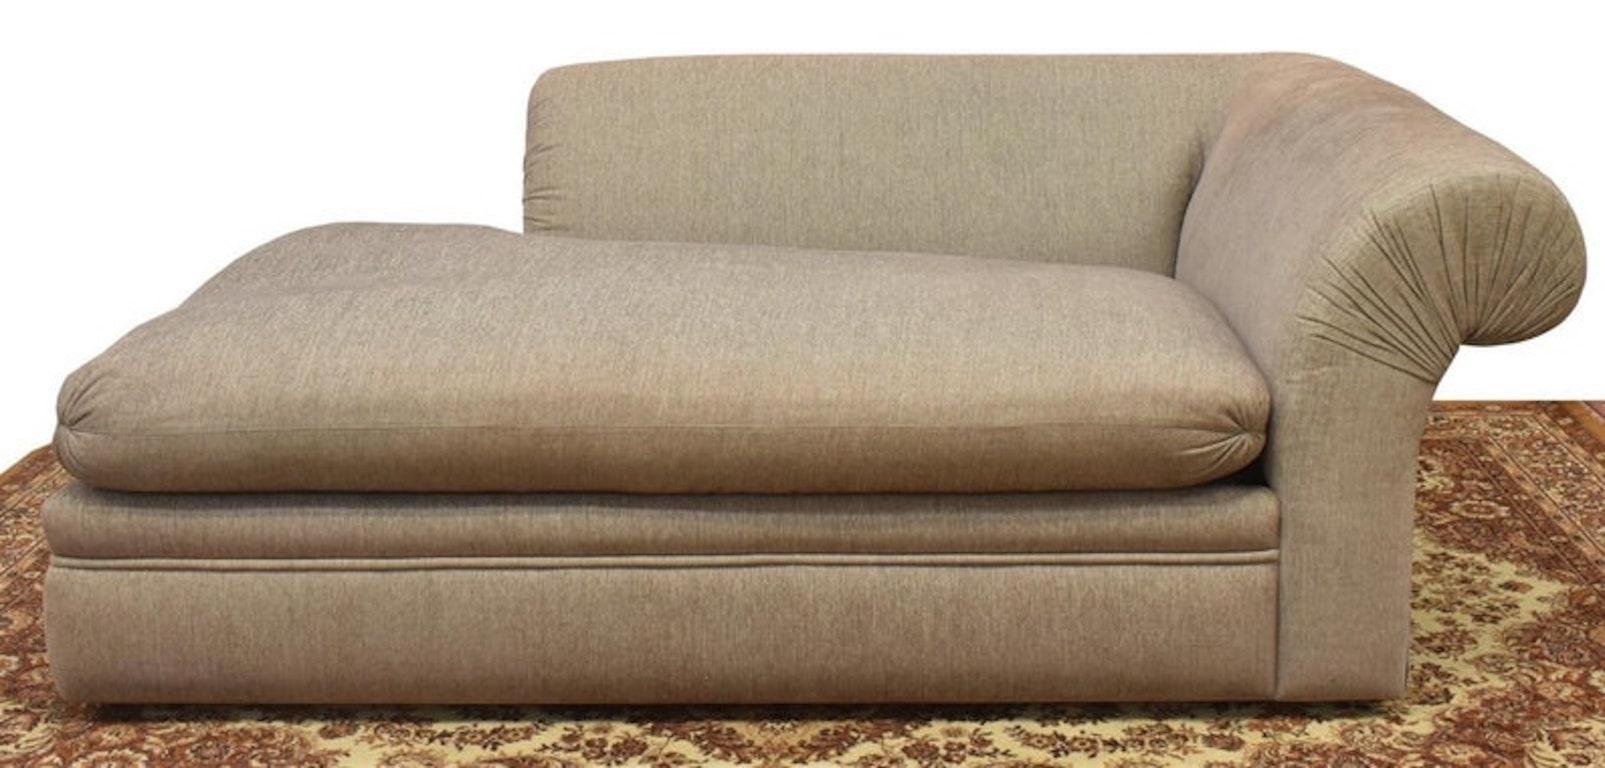 American A. Rudin Upholstered Chaise Lounge Sofa with Fortuny Throw Pillows For Sale